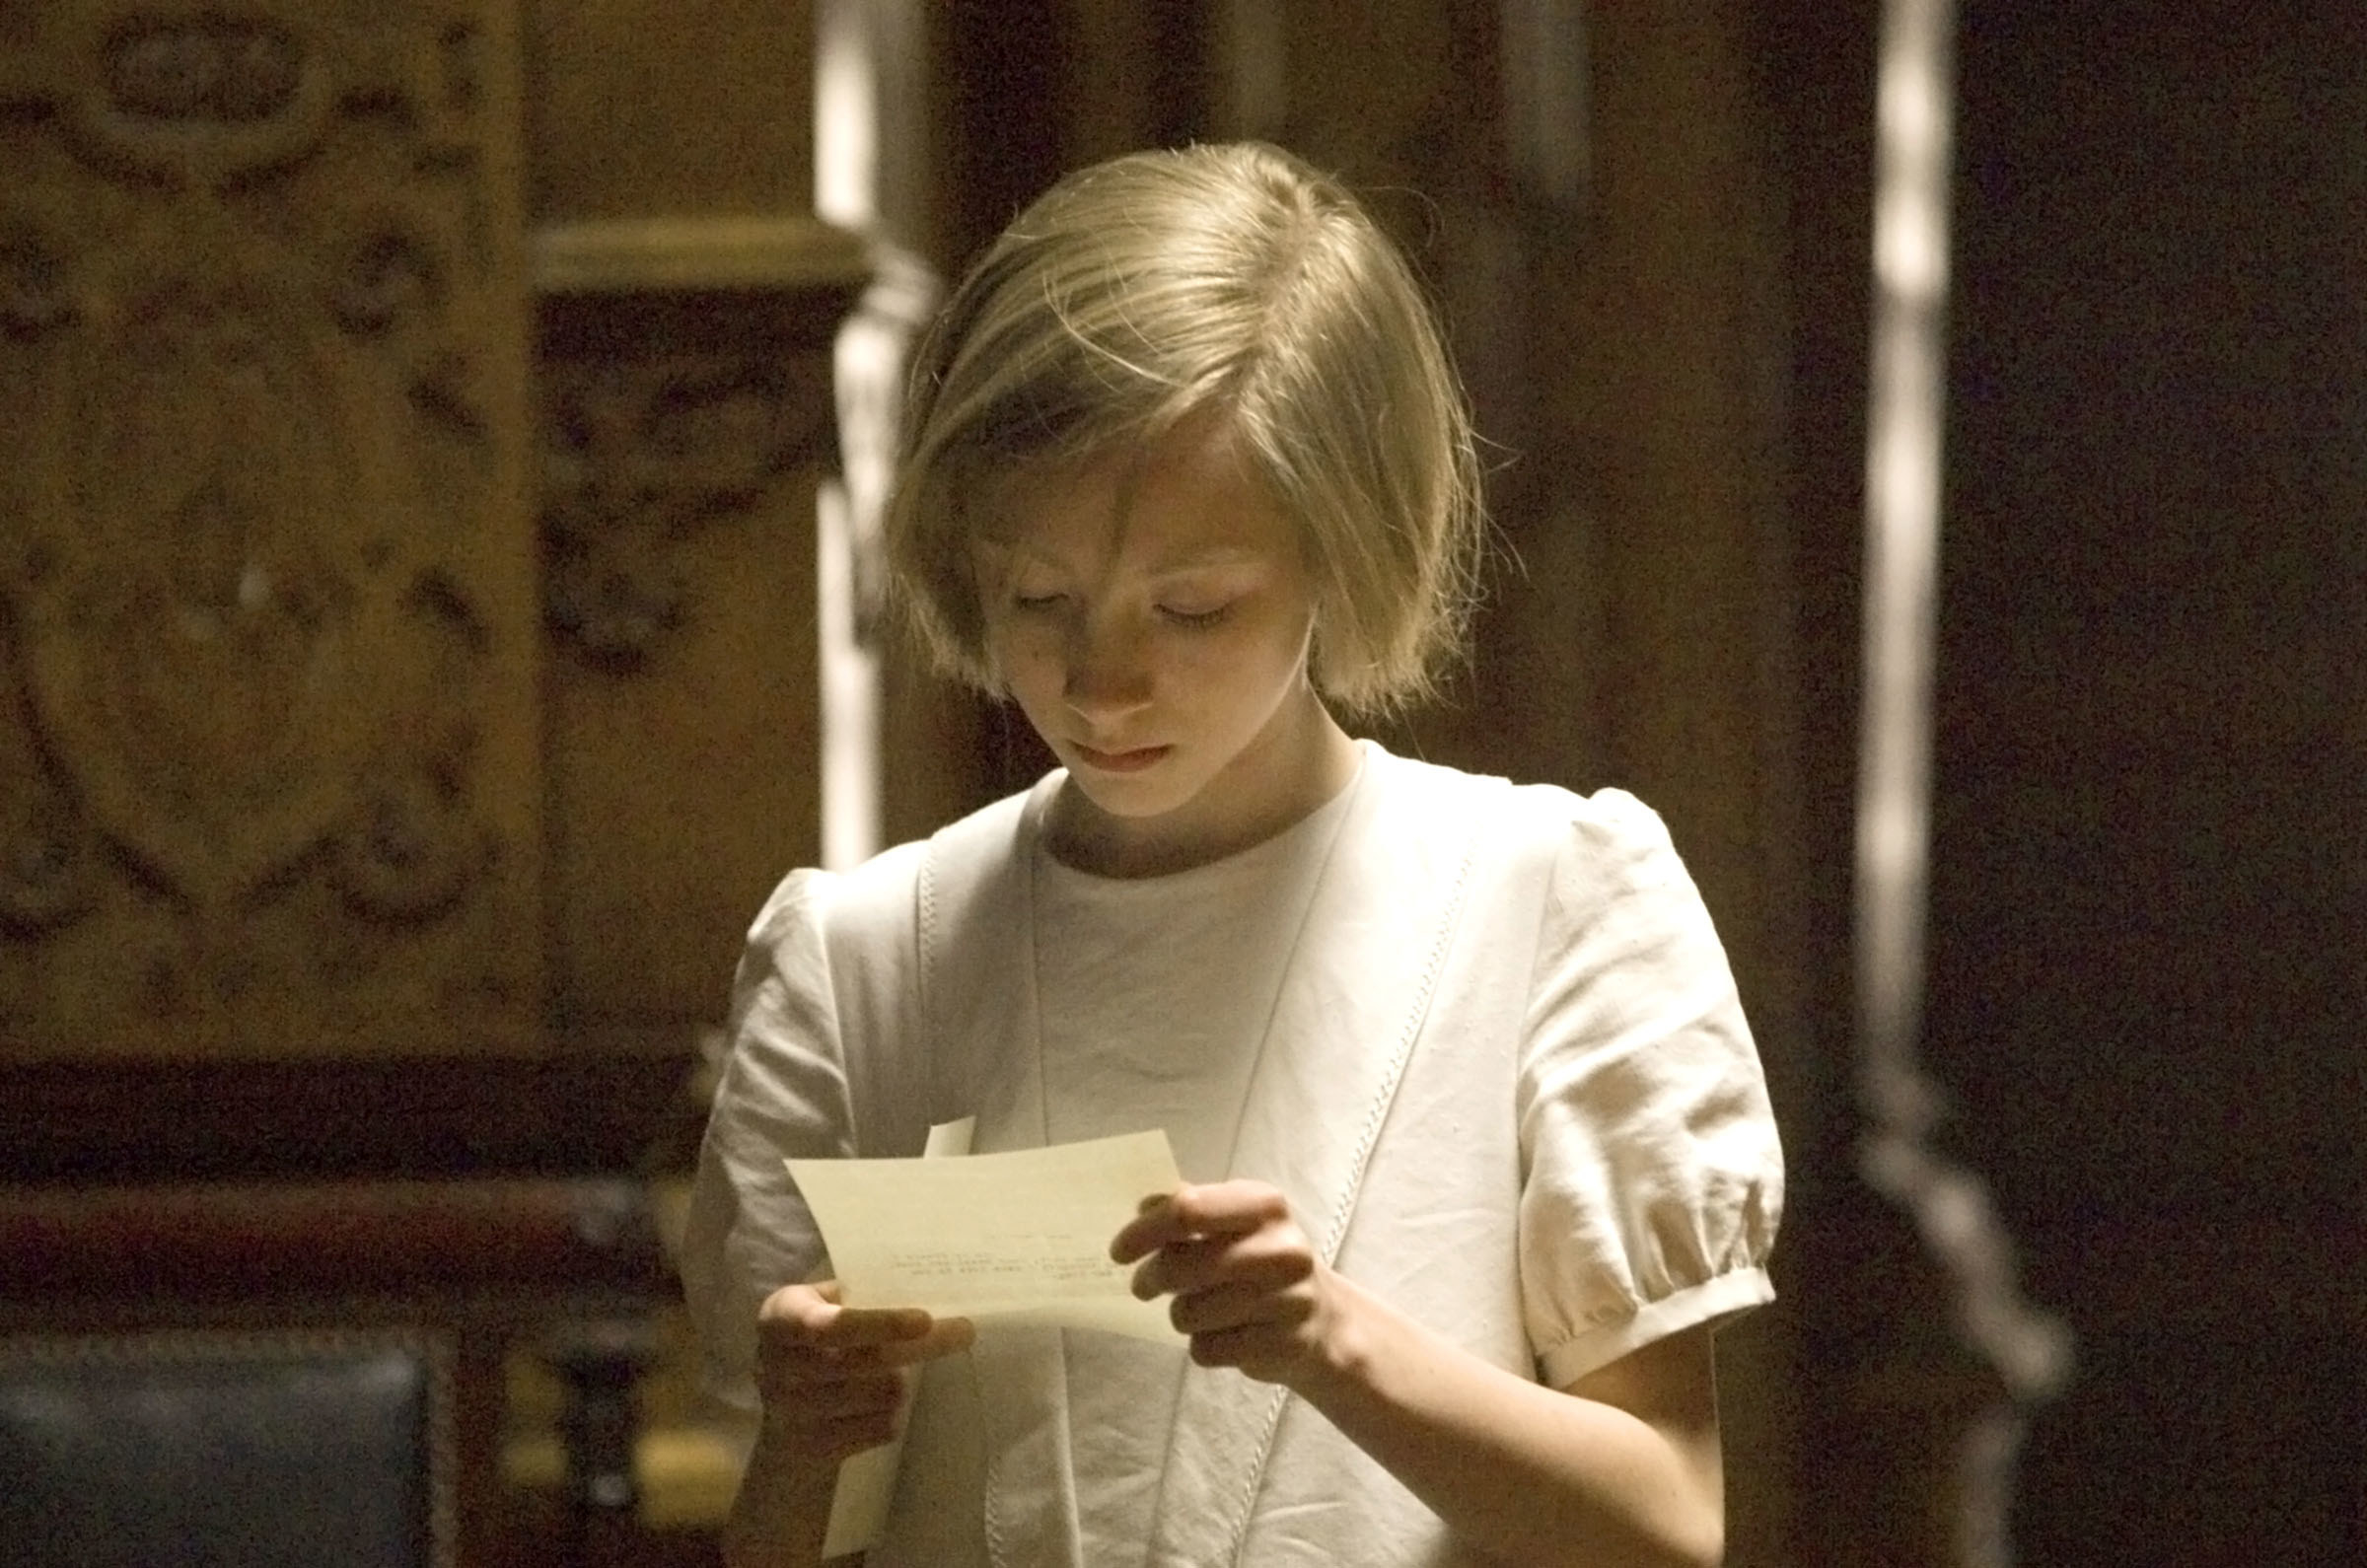 A young girls reading a letter